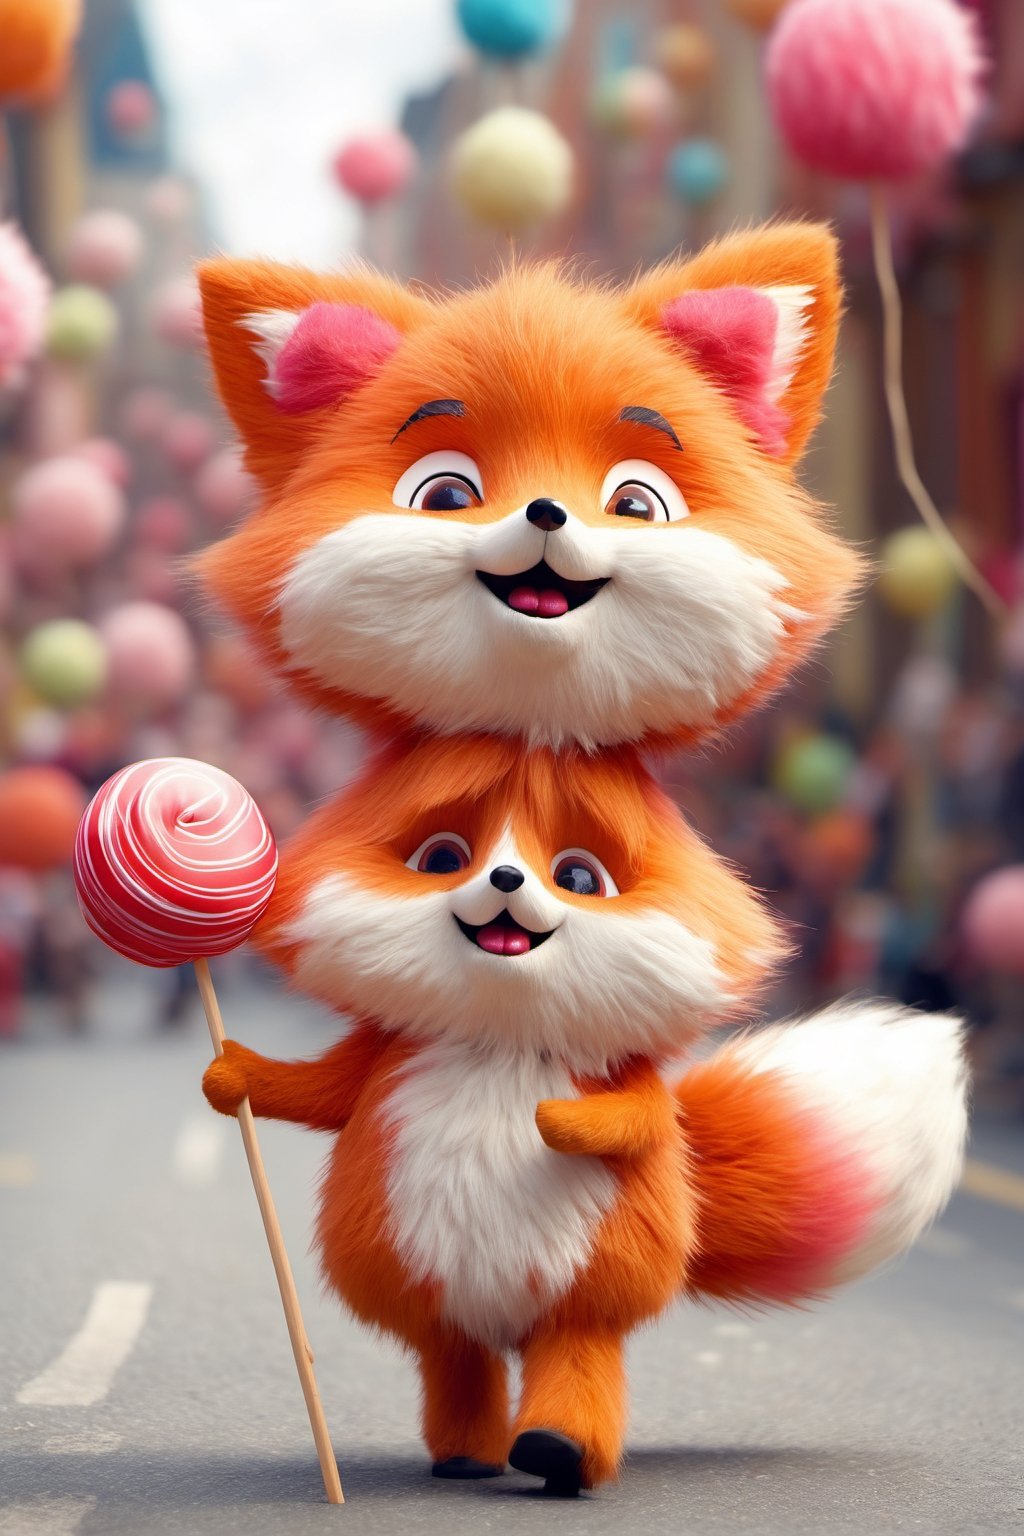 Cute Animals - A cute fluffy fox dressed as a child in a festival running on a street with a large lollipop. Its body is round and soft, with tiny paws and a small, cute face with big, shiny eyes and rosy cheeks.